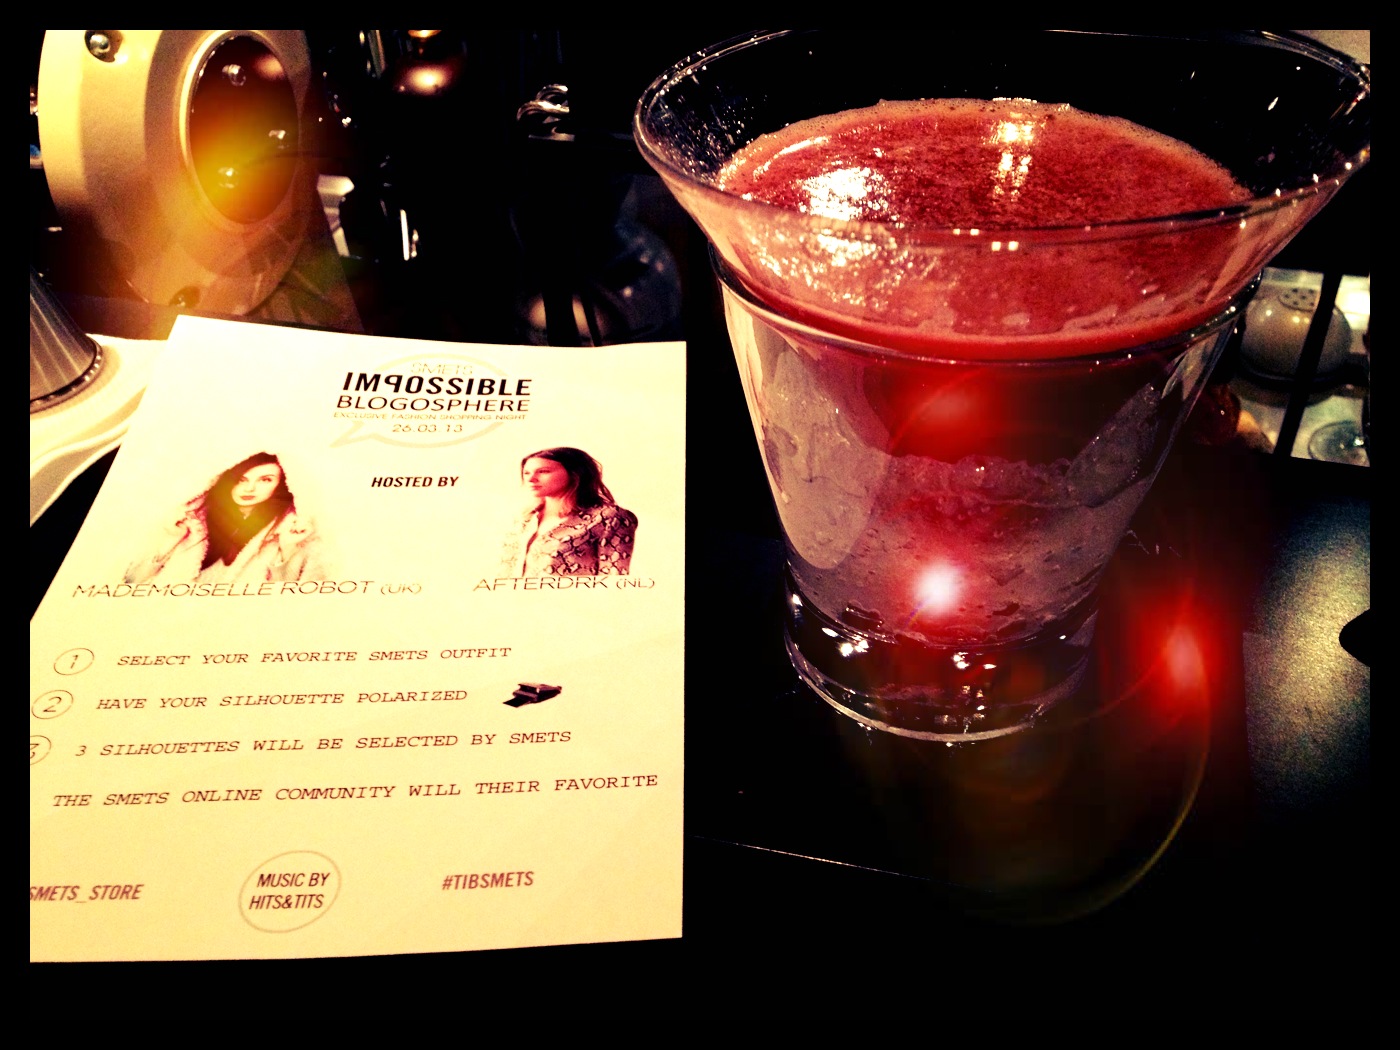 My SMETS Bowery cocktail!/ Pic by kiwikoo